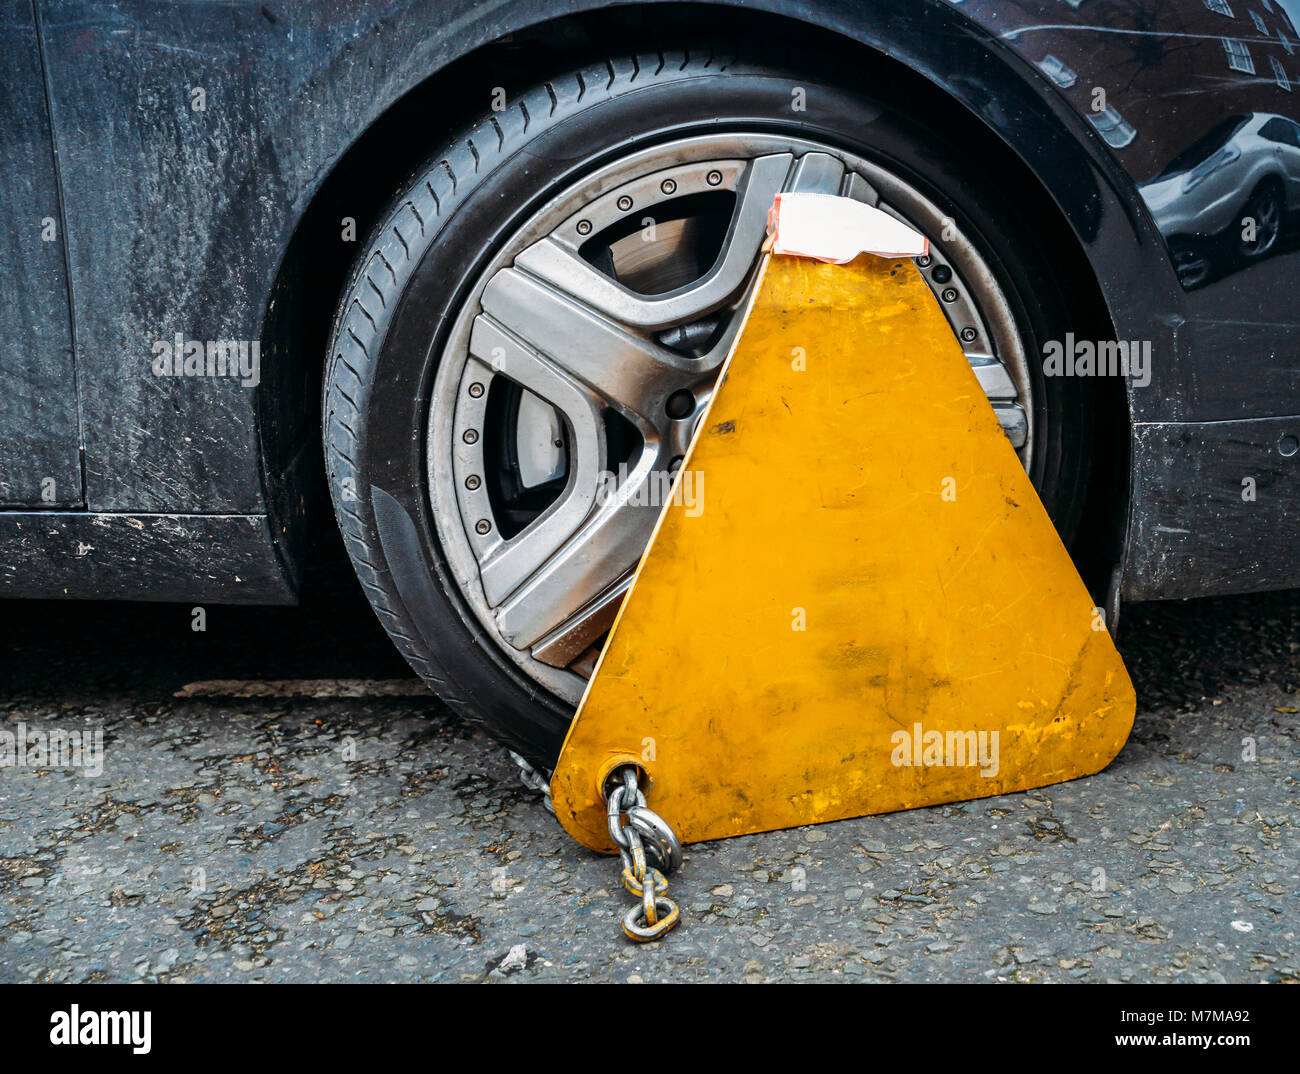 Yellow triangle wheel clamp locked with messing lock and chain on an illegally parked car Stock Photo